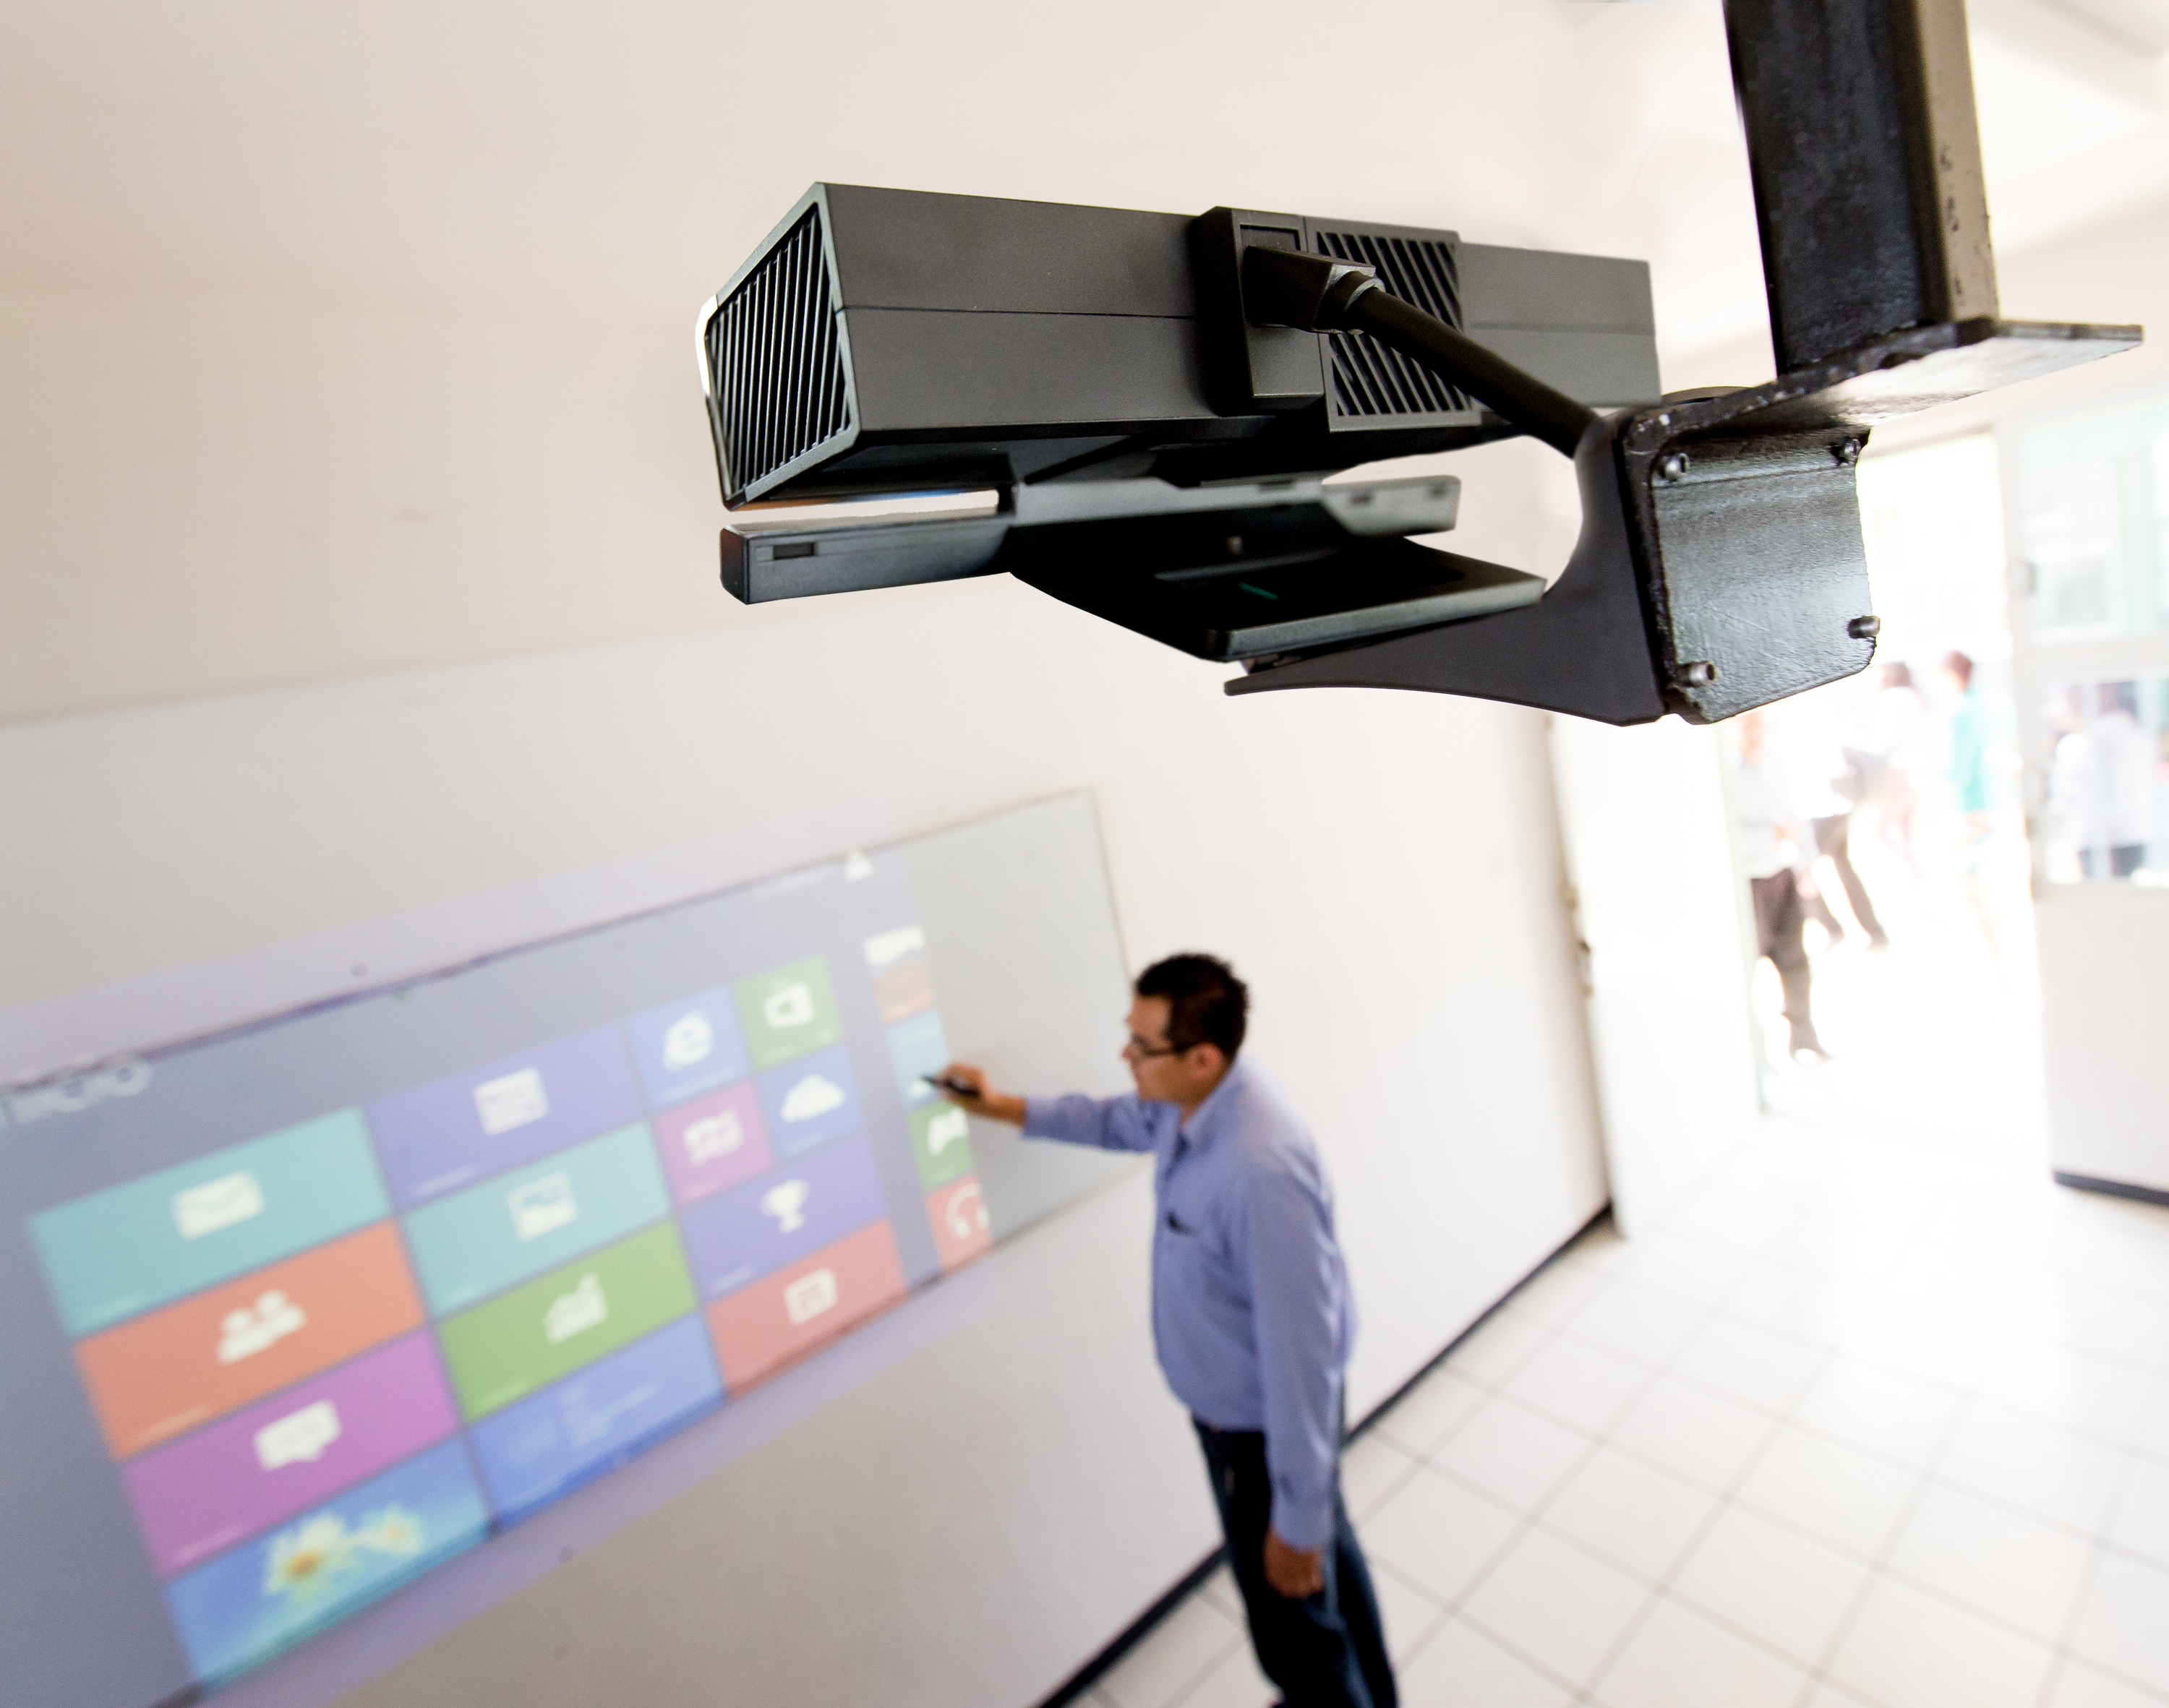 Microsoft releases Kinect SDK 2.0 and new adapter kit - The